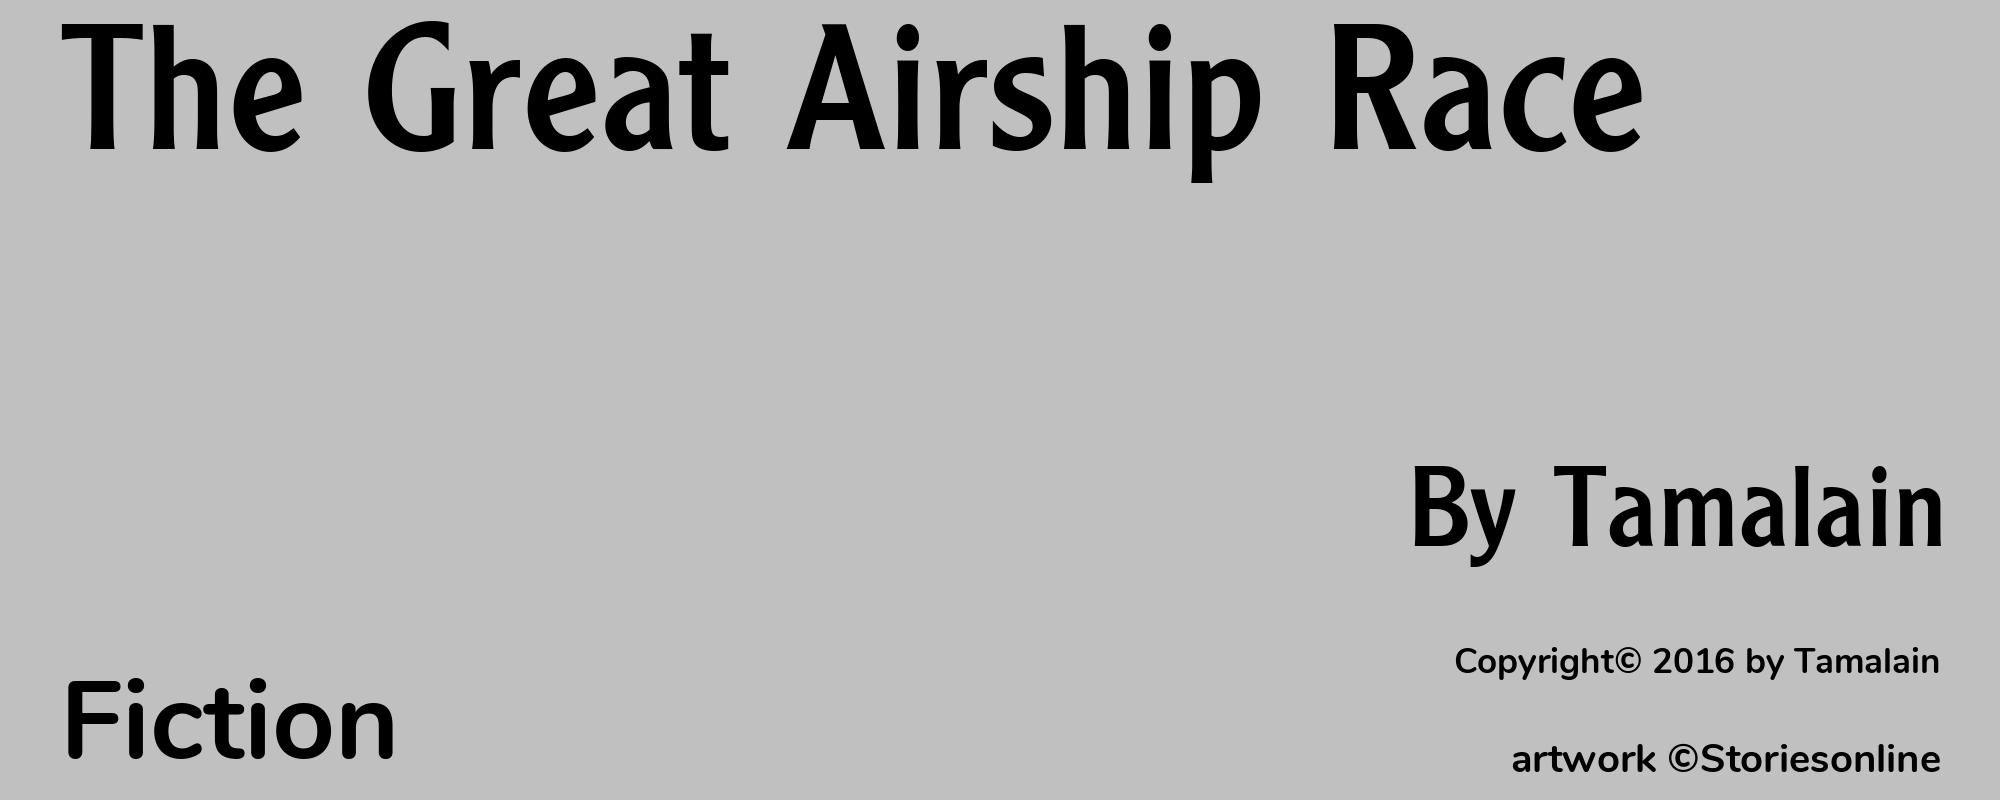 The Great Airship Race - Cover